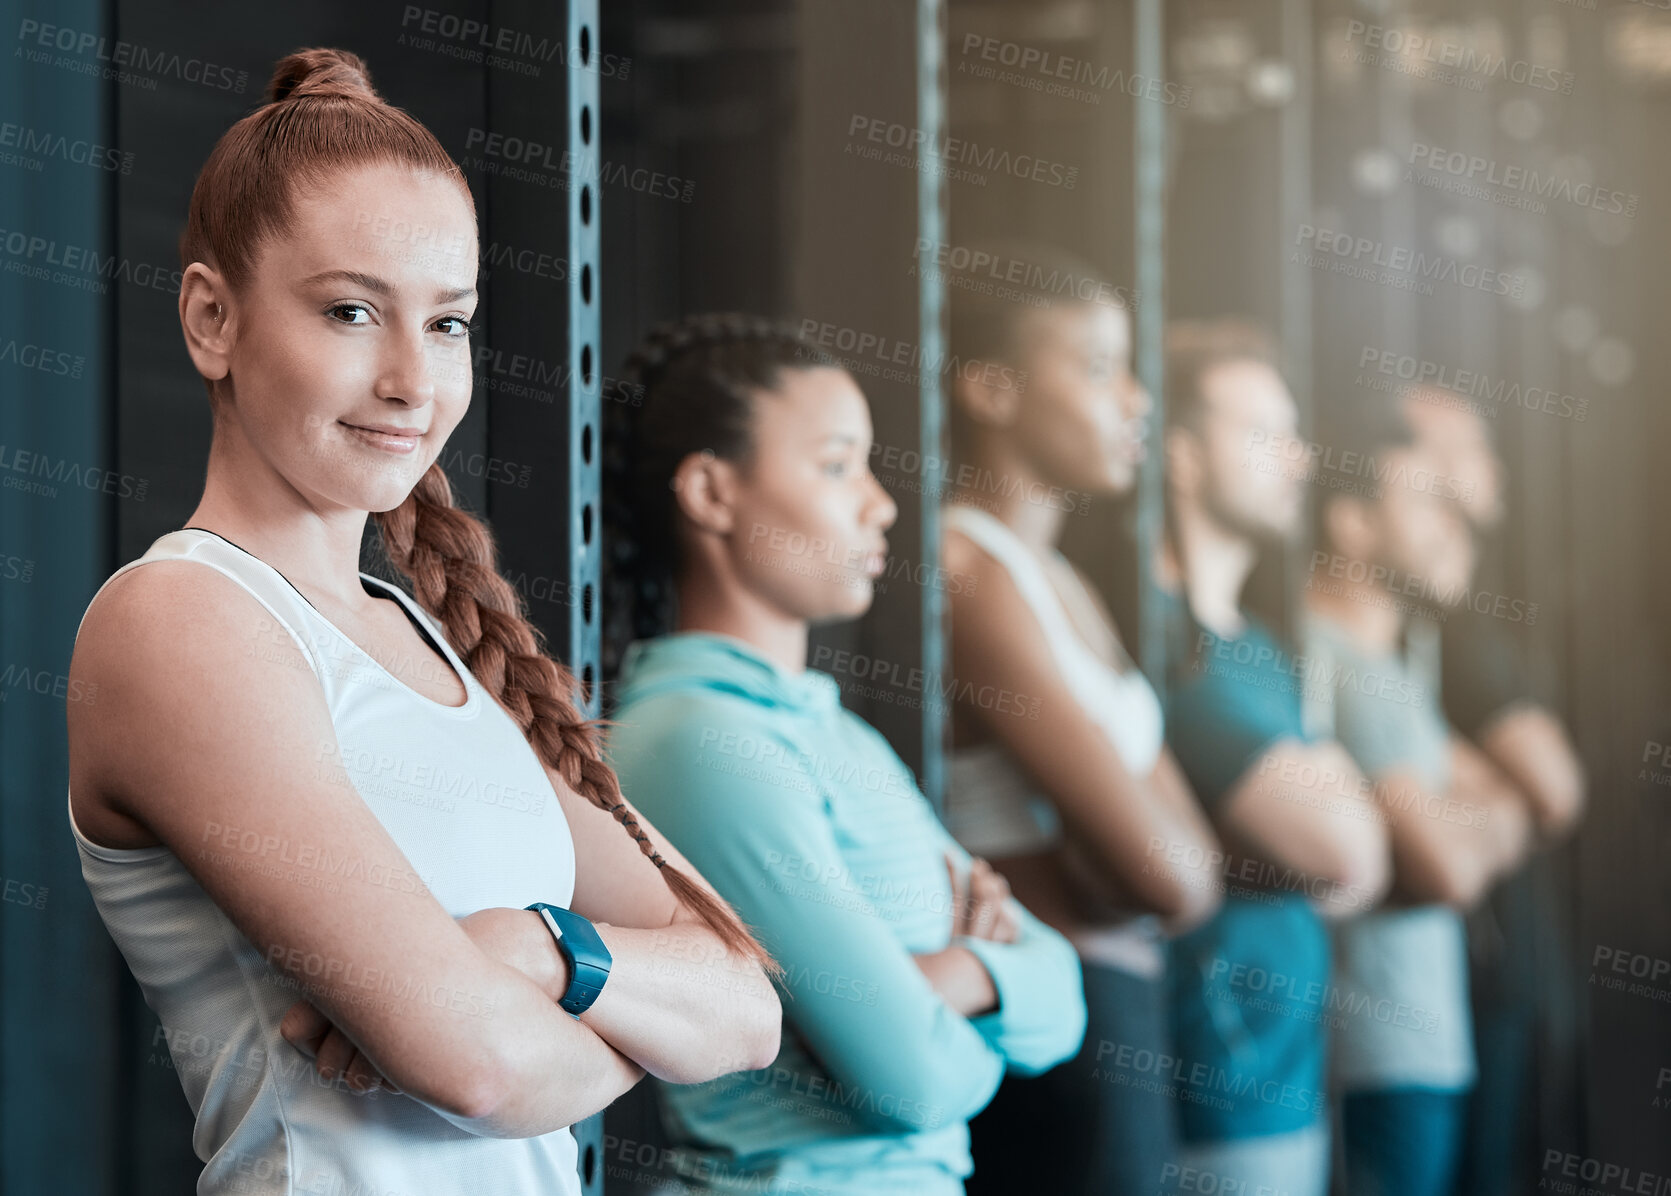 Buy stock photo Shot of a young woman ready and waiting to workout